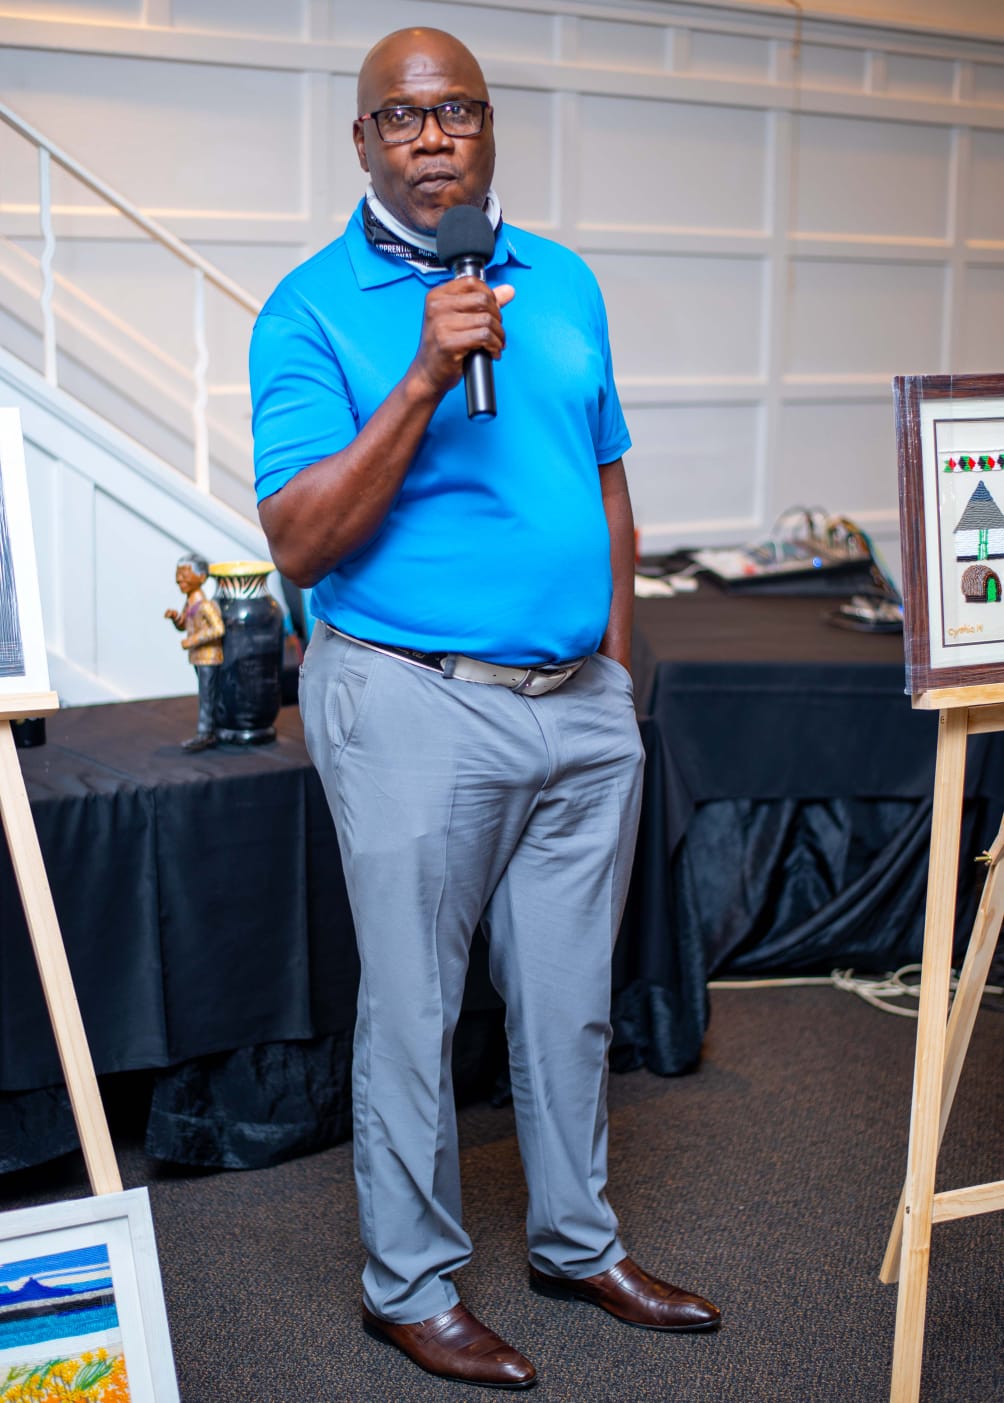 Eric Mhlongo the Pro ; motivated young golfers at the dinner